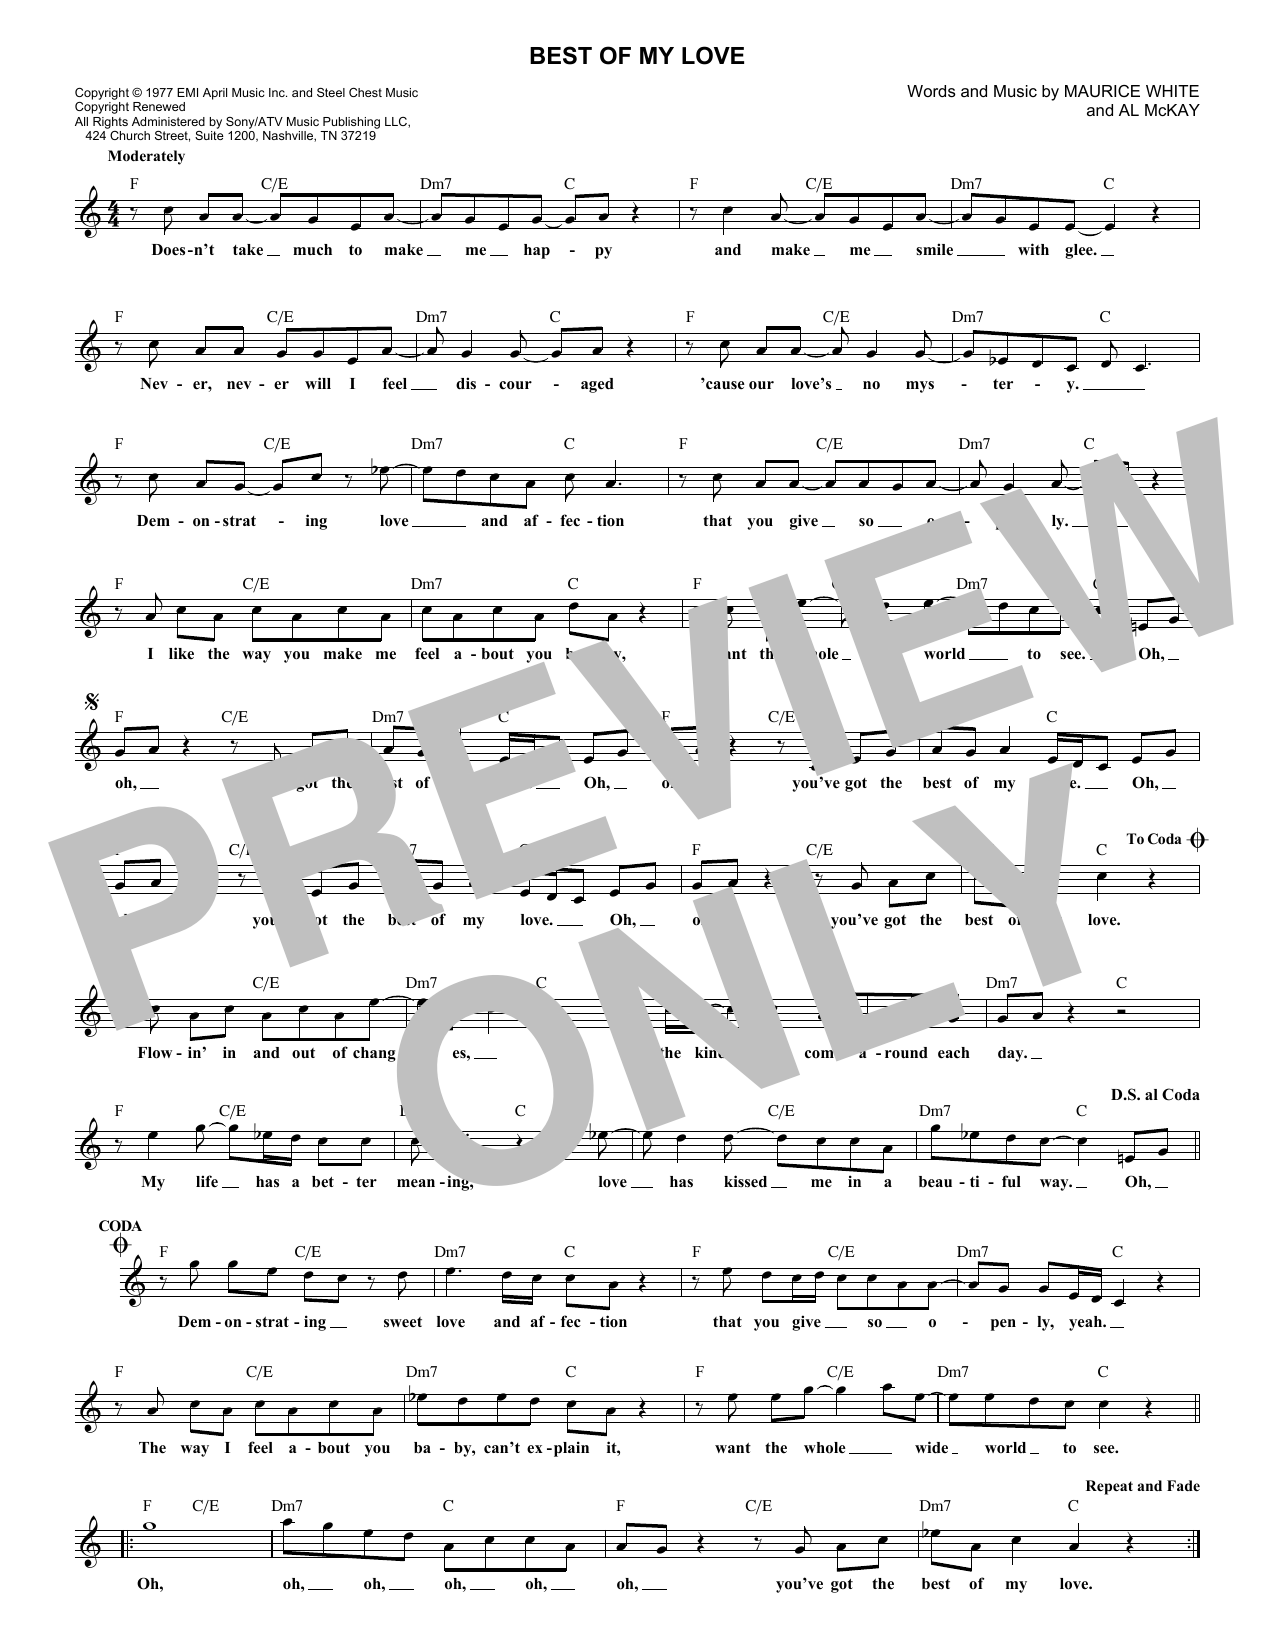 Download The Emotions Best Of My Love Sheet Music